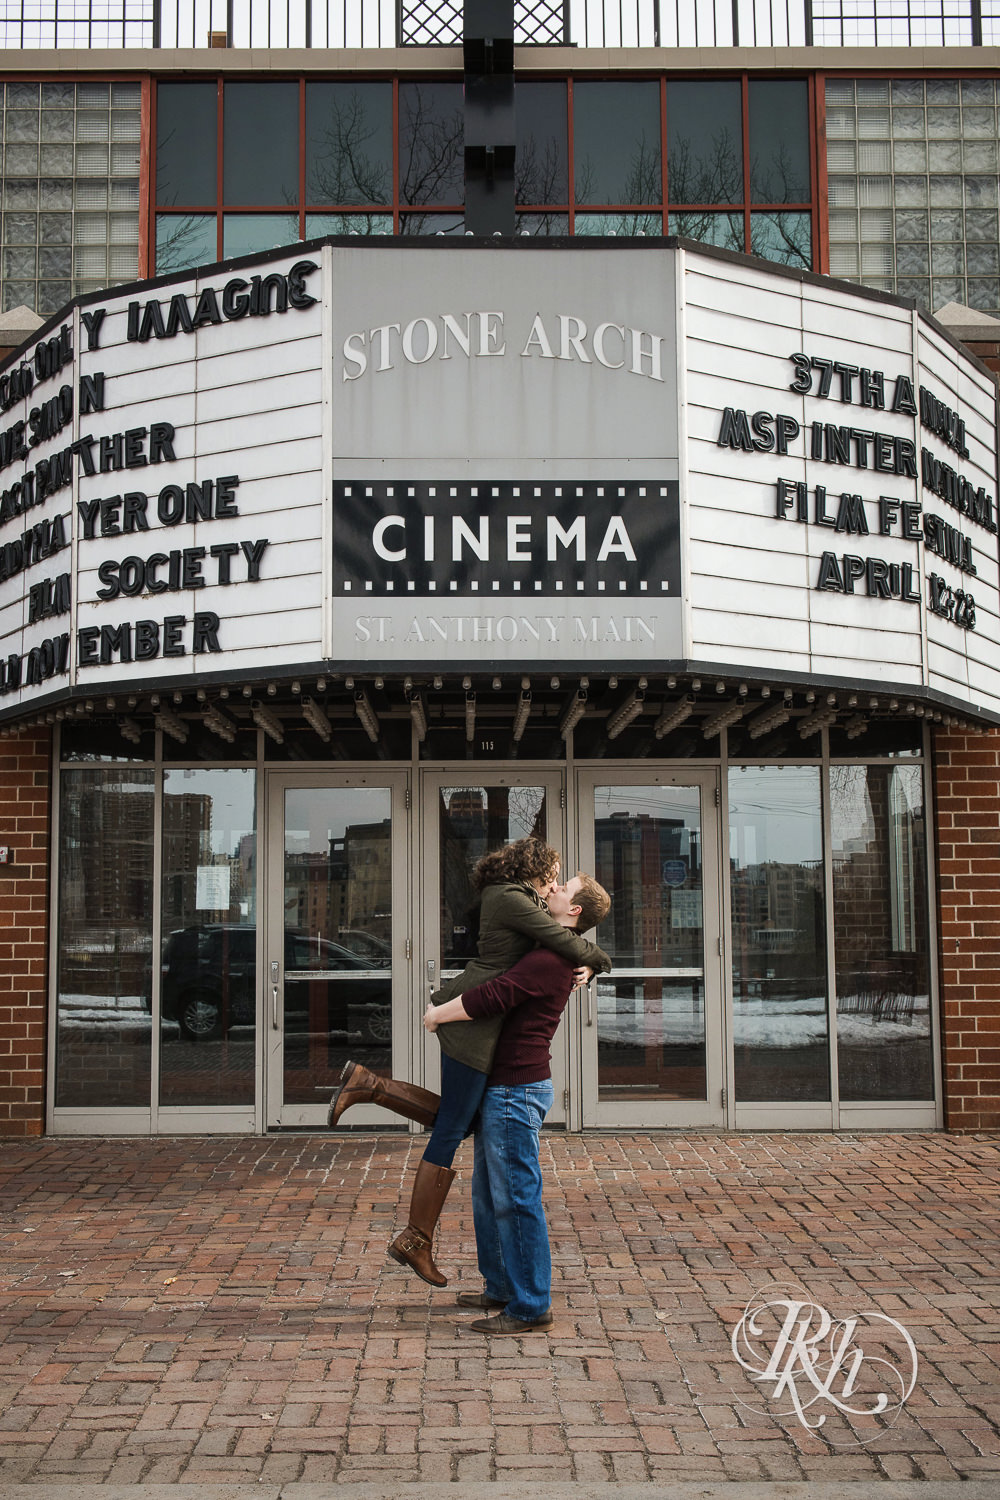 Man kisses woman in front of the Stone Arch Cinema in Minneapolis, Minnesota.